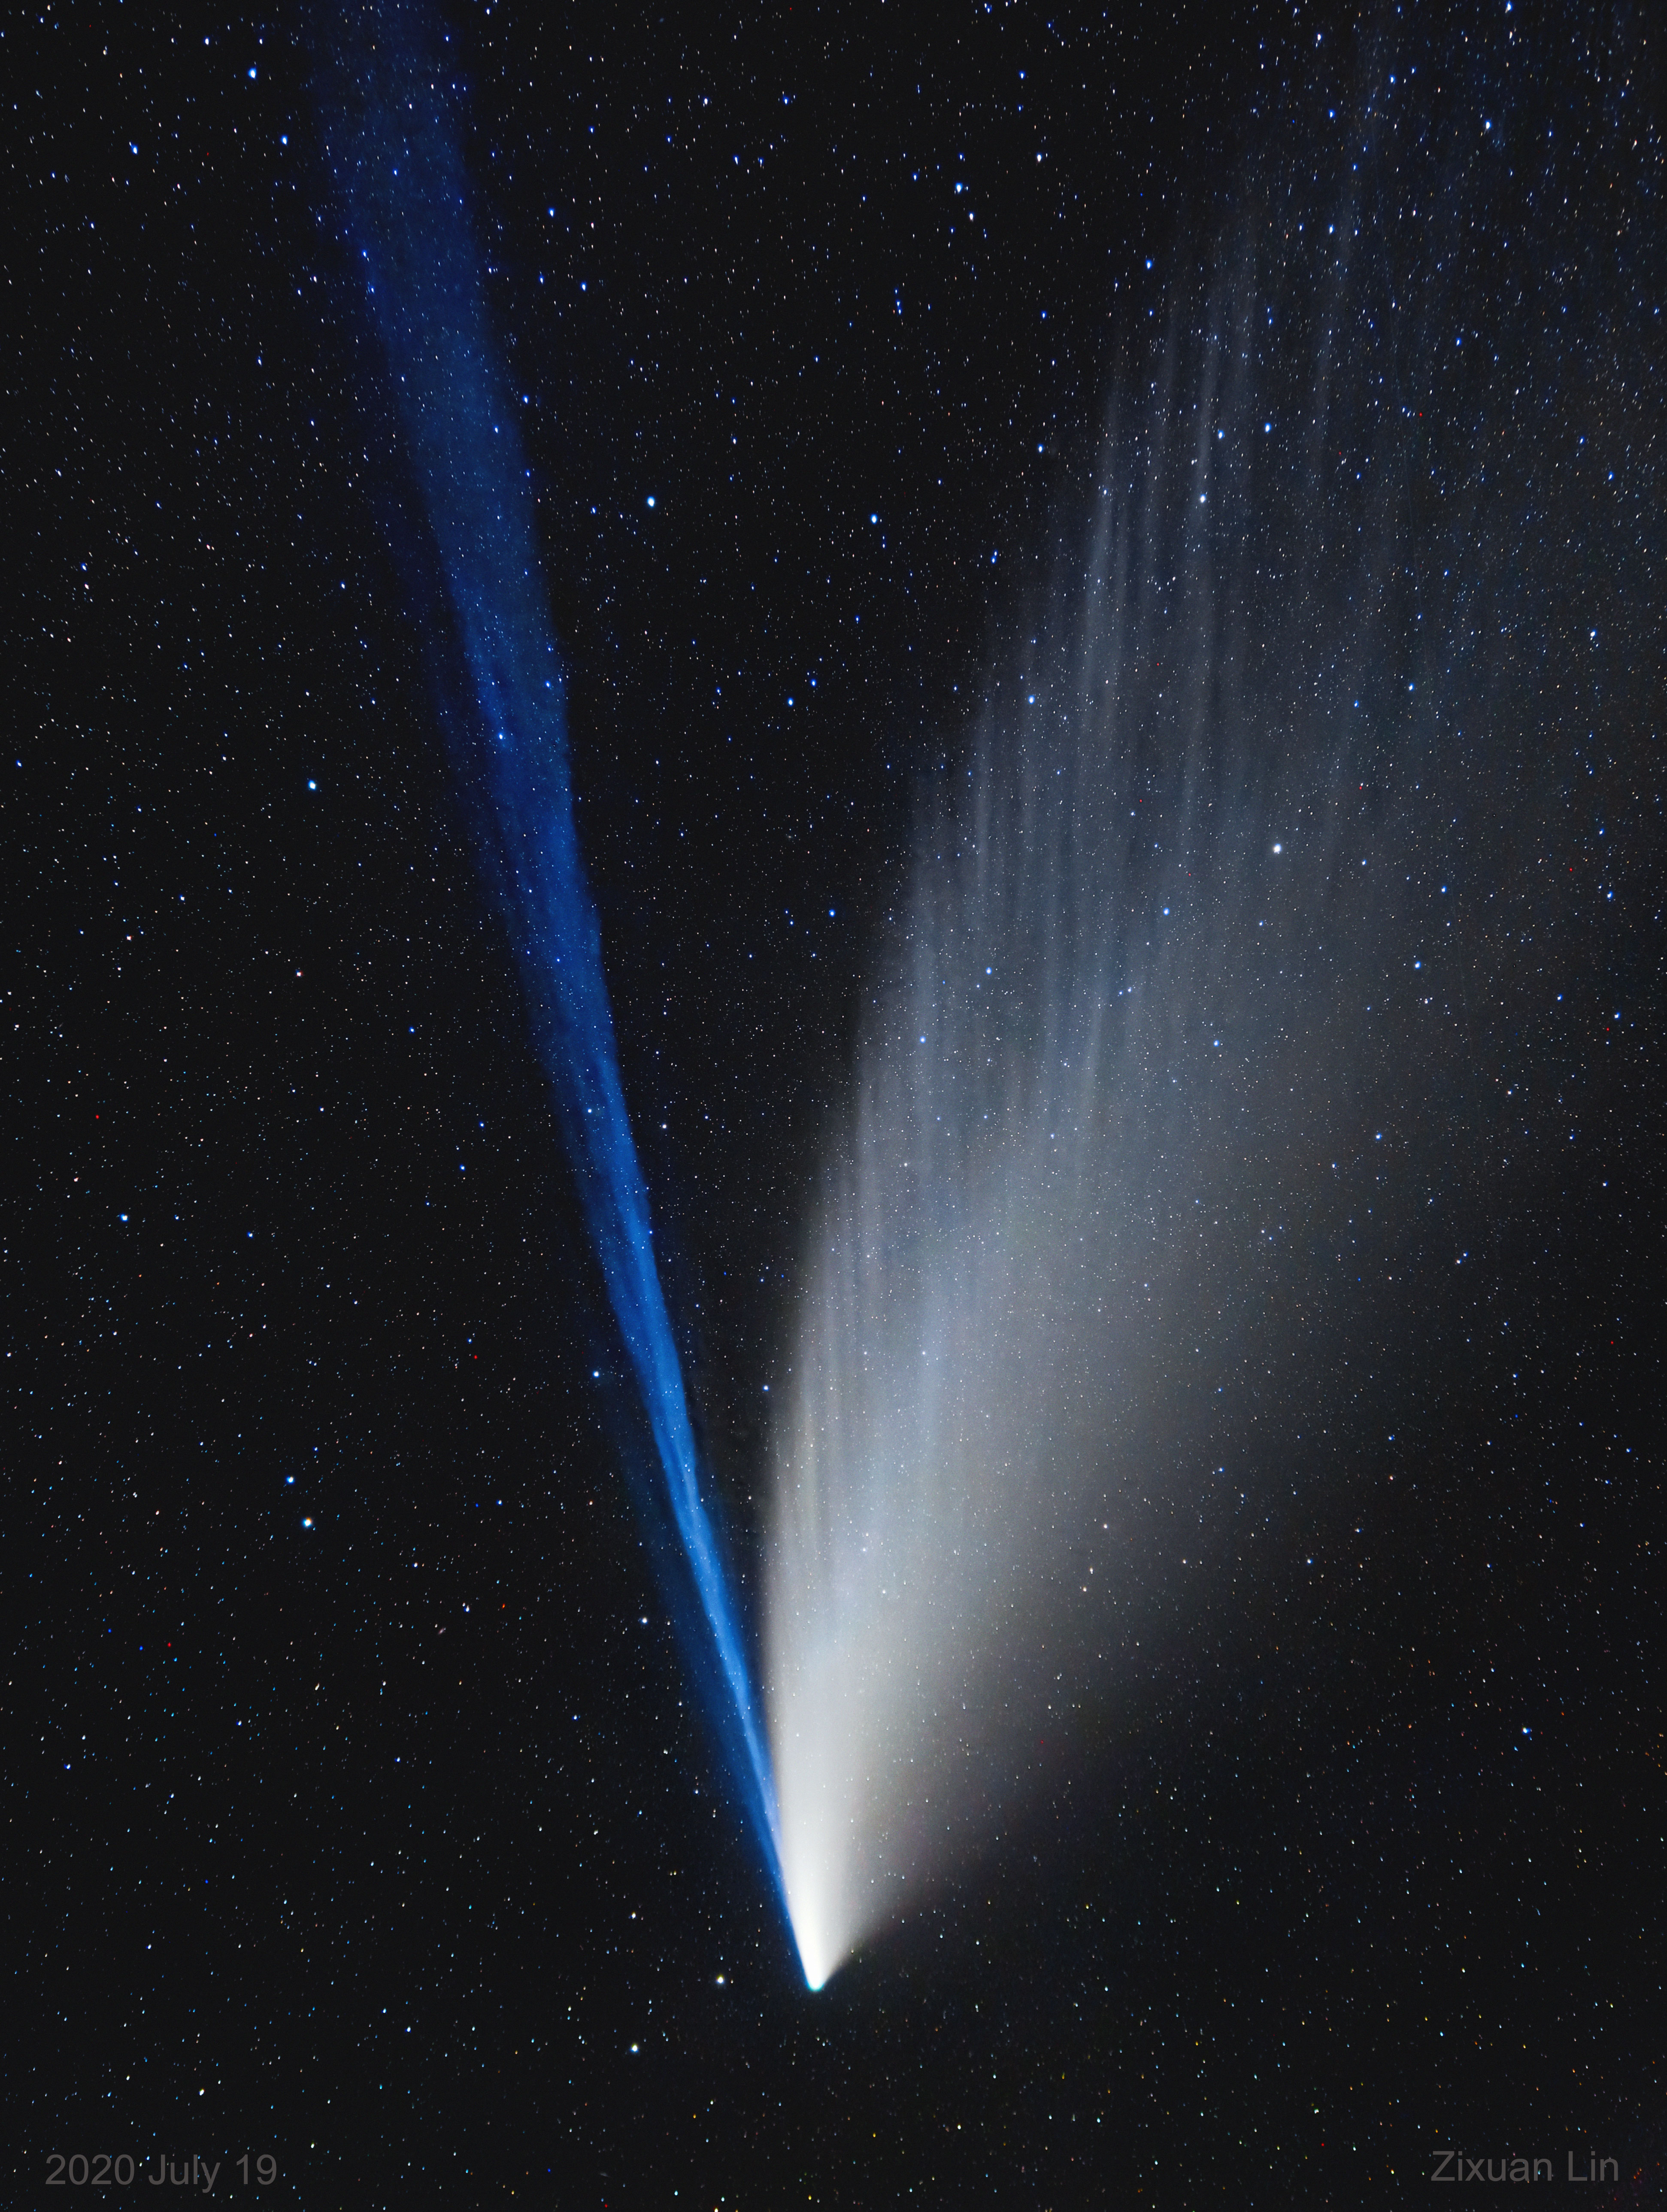 APOD: 2020 July 22  The Structured Tails of Comet NEOWISE